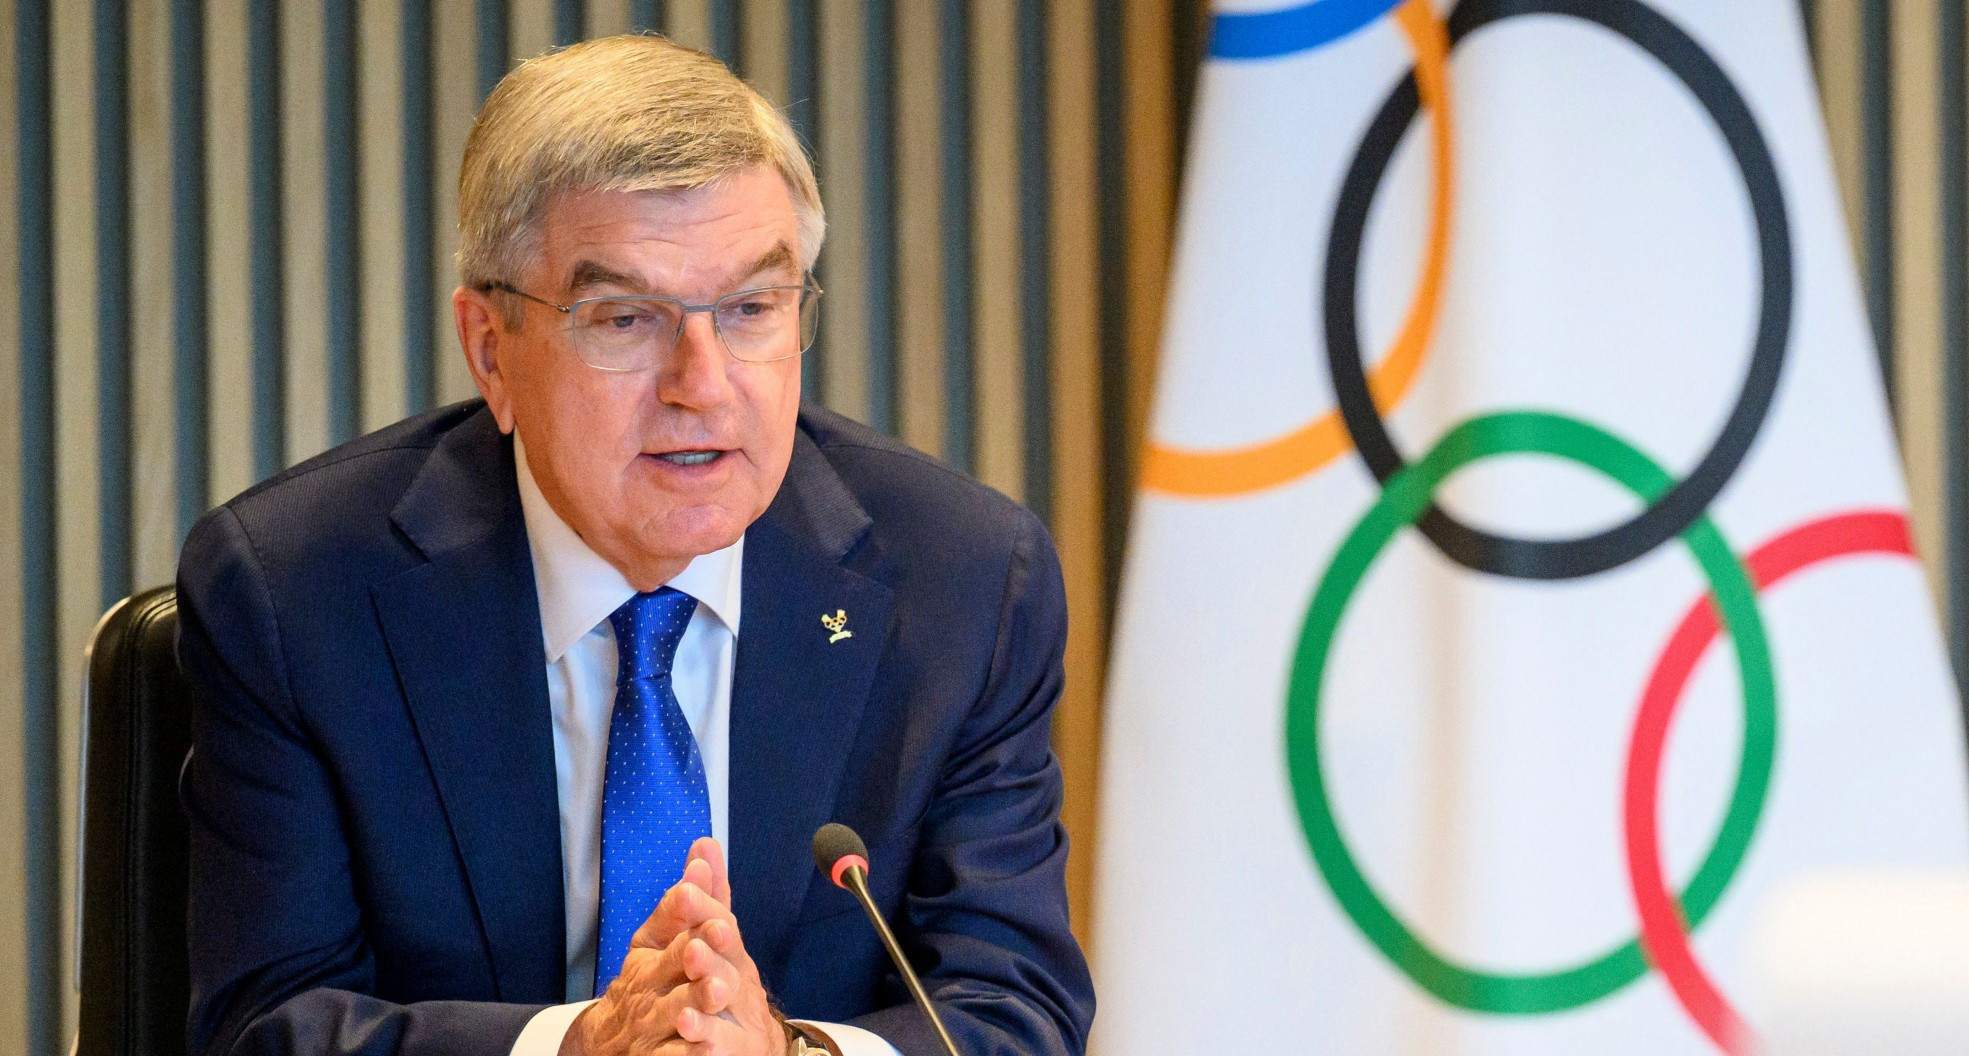 Thomas Bach said the IOC has "full confidence" in the French security authorities ©Getty Images